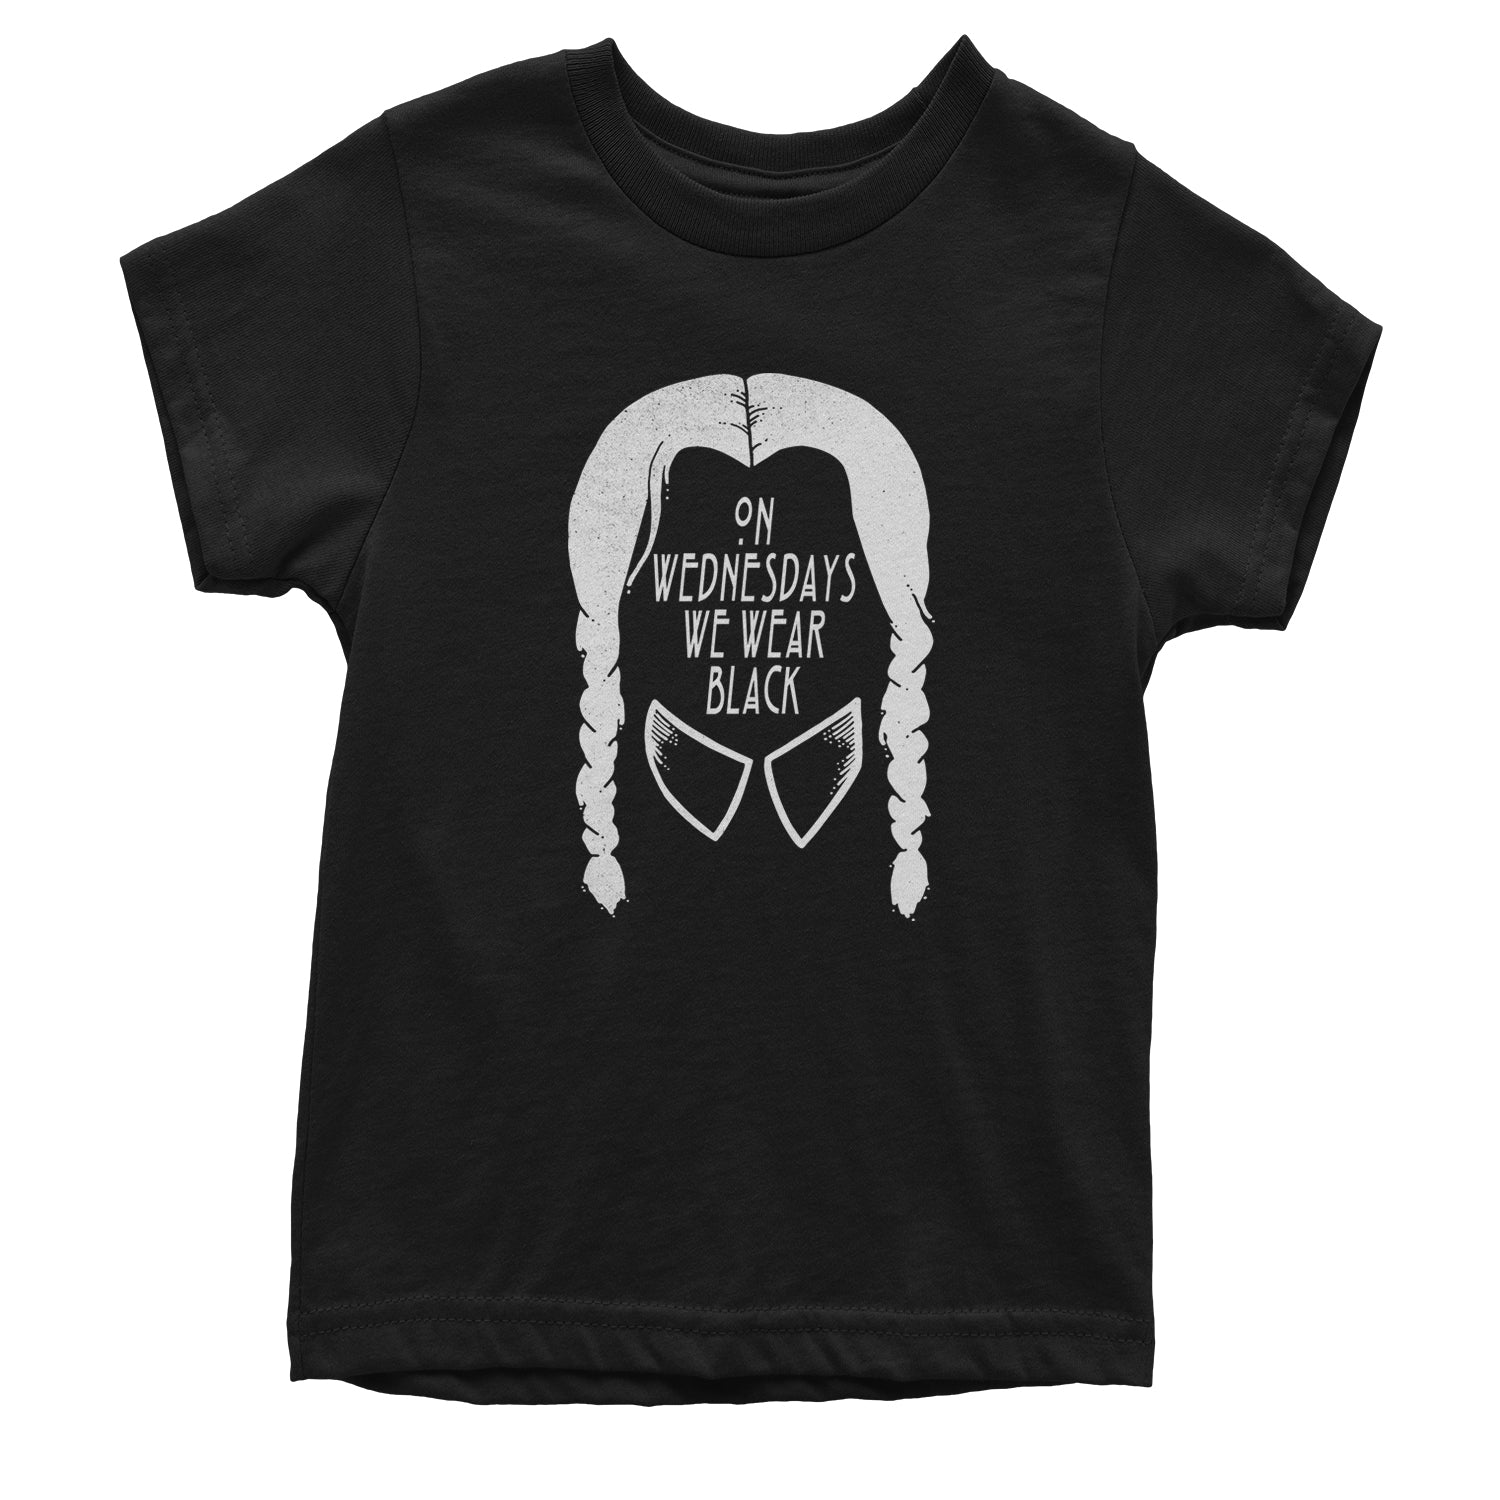 On Wednesdays, We Wear Black Youth T-shirt addams, family, gomez, morticia, pugsly, ricci, Wednesday by Expression Tees